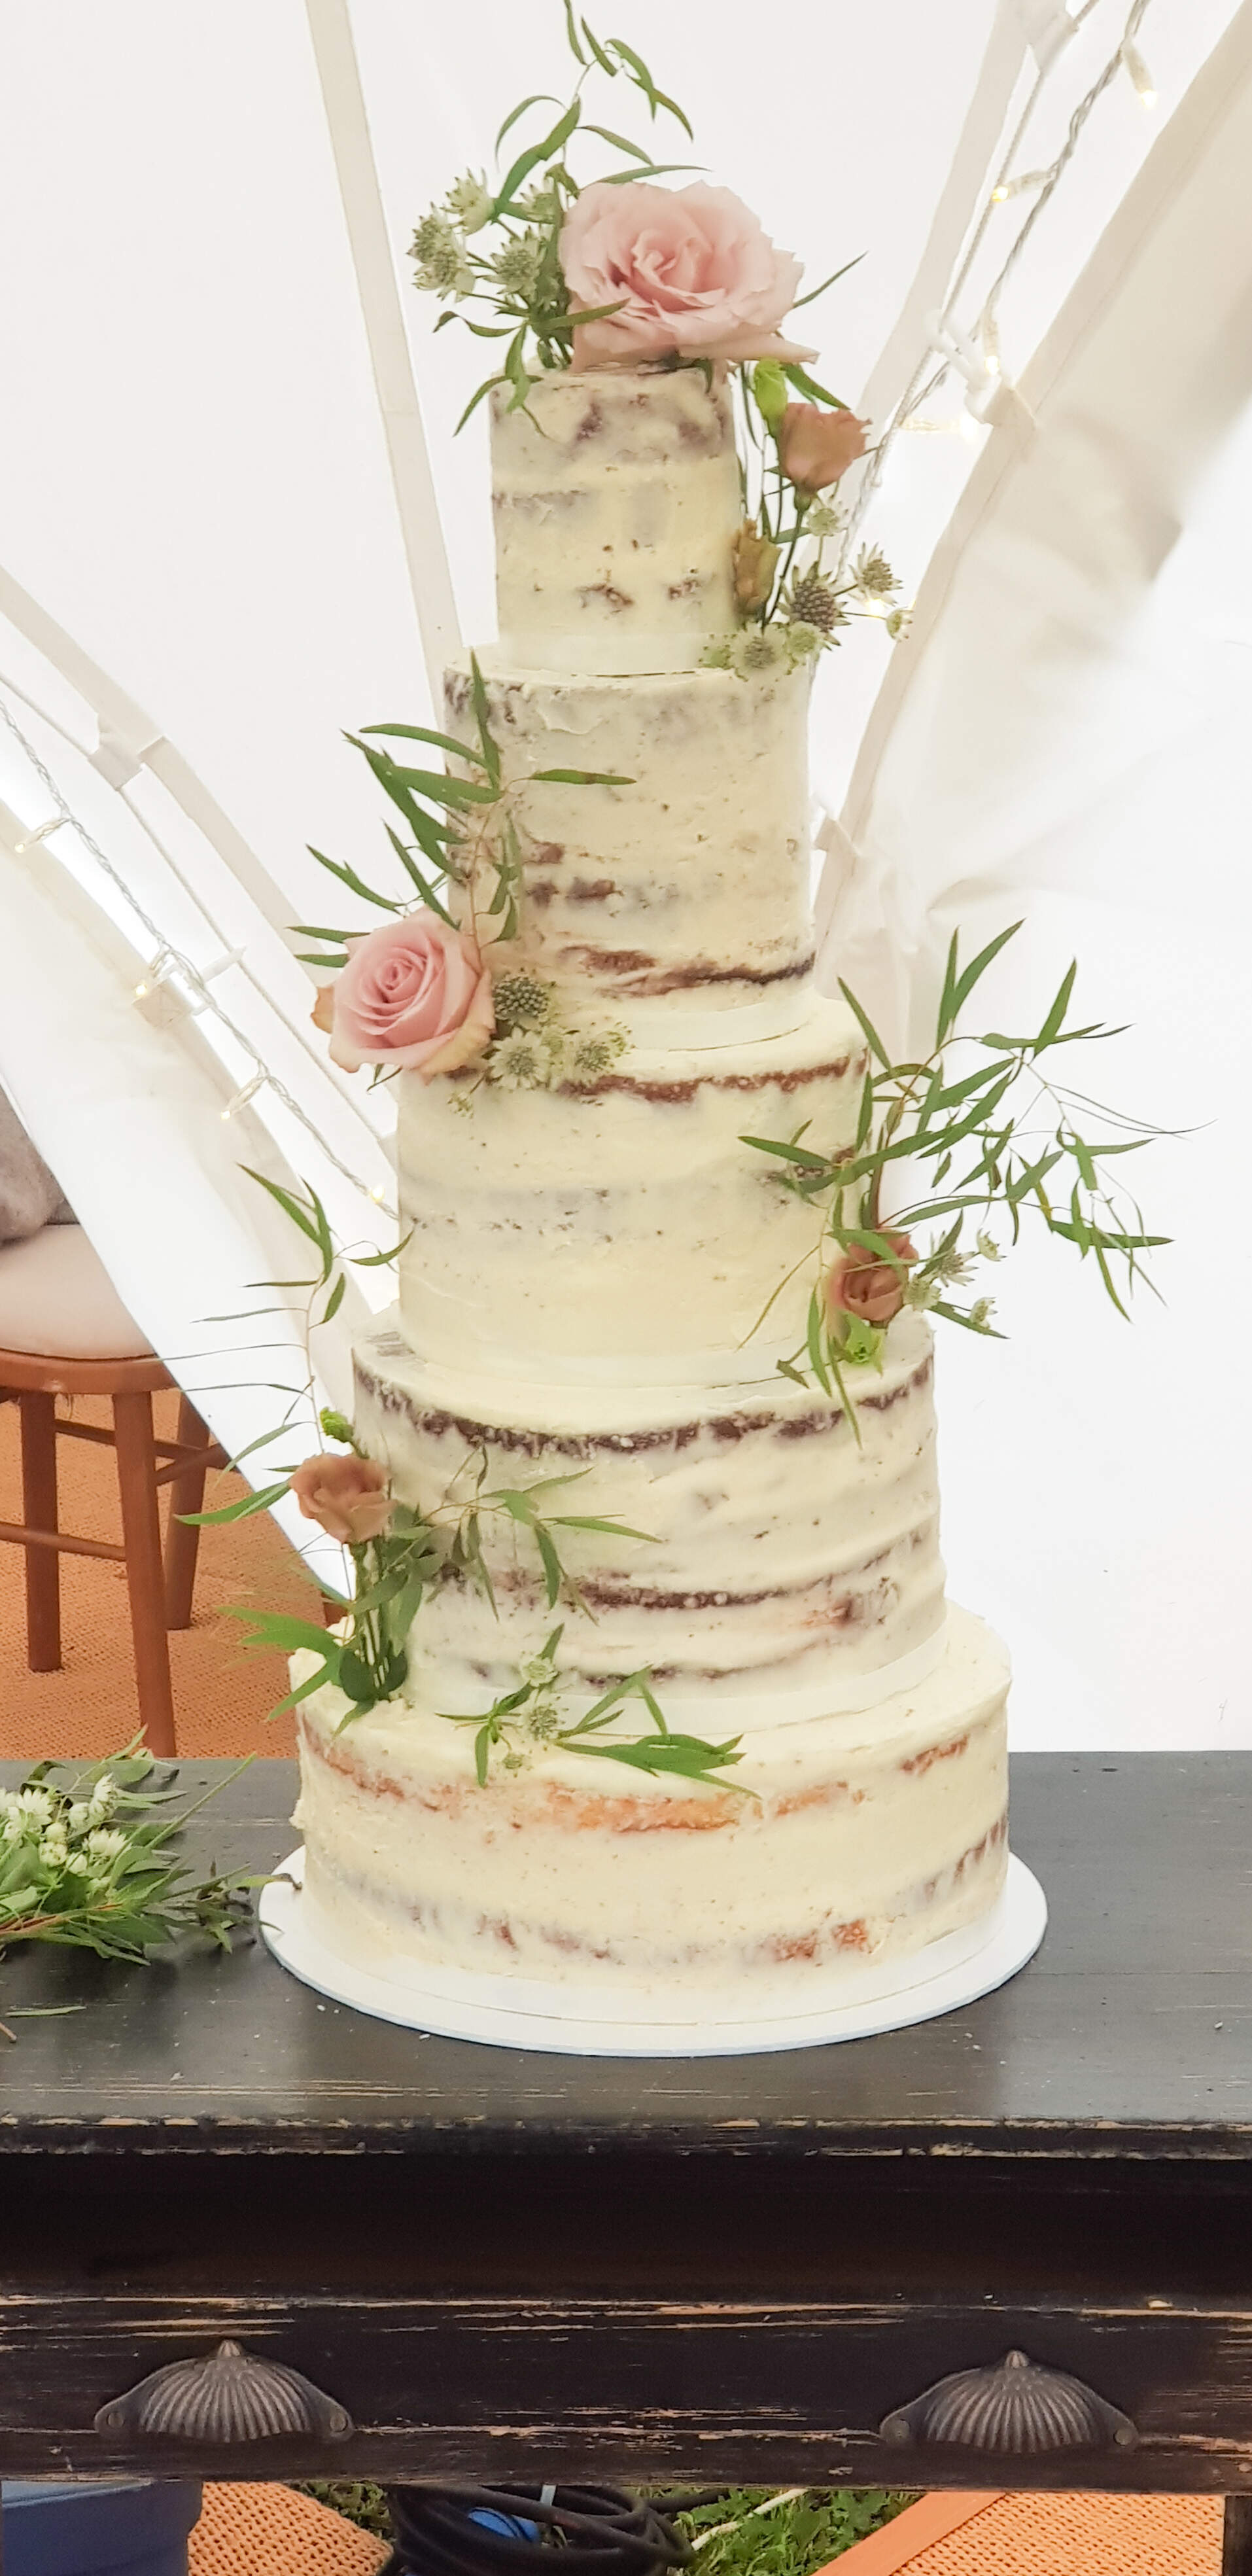 Difference between Buttercream, Semi naked and naked cakes